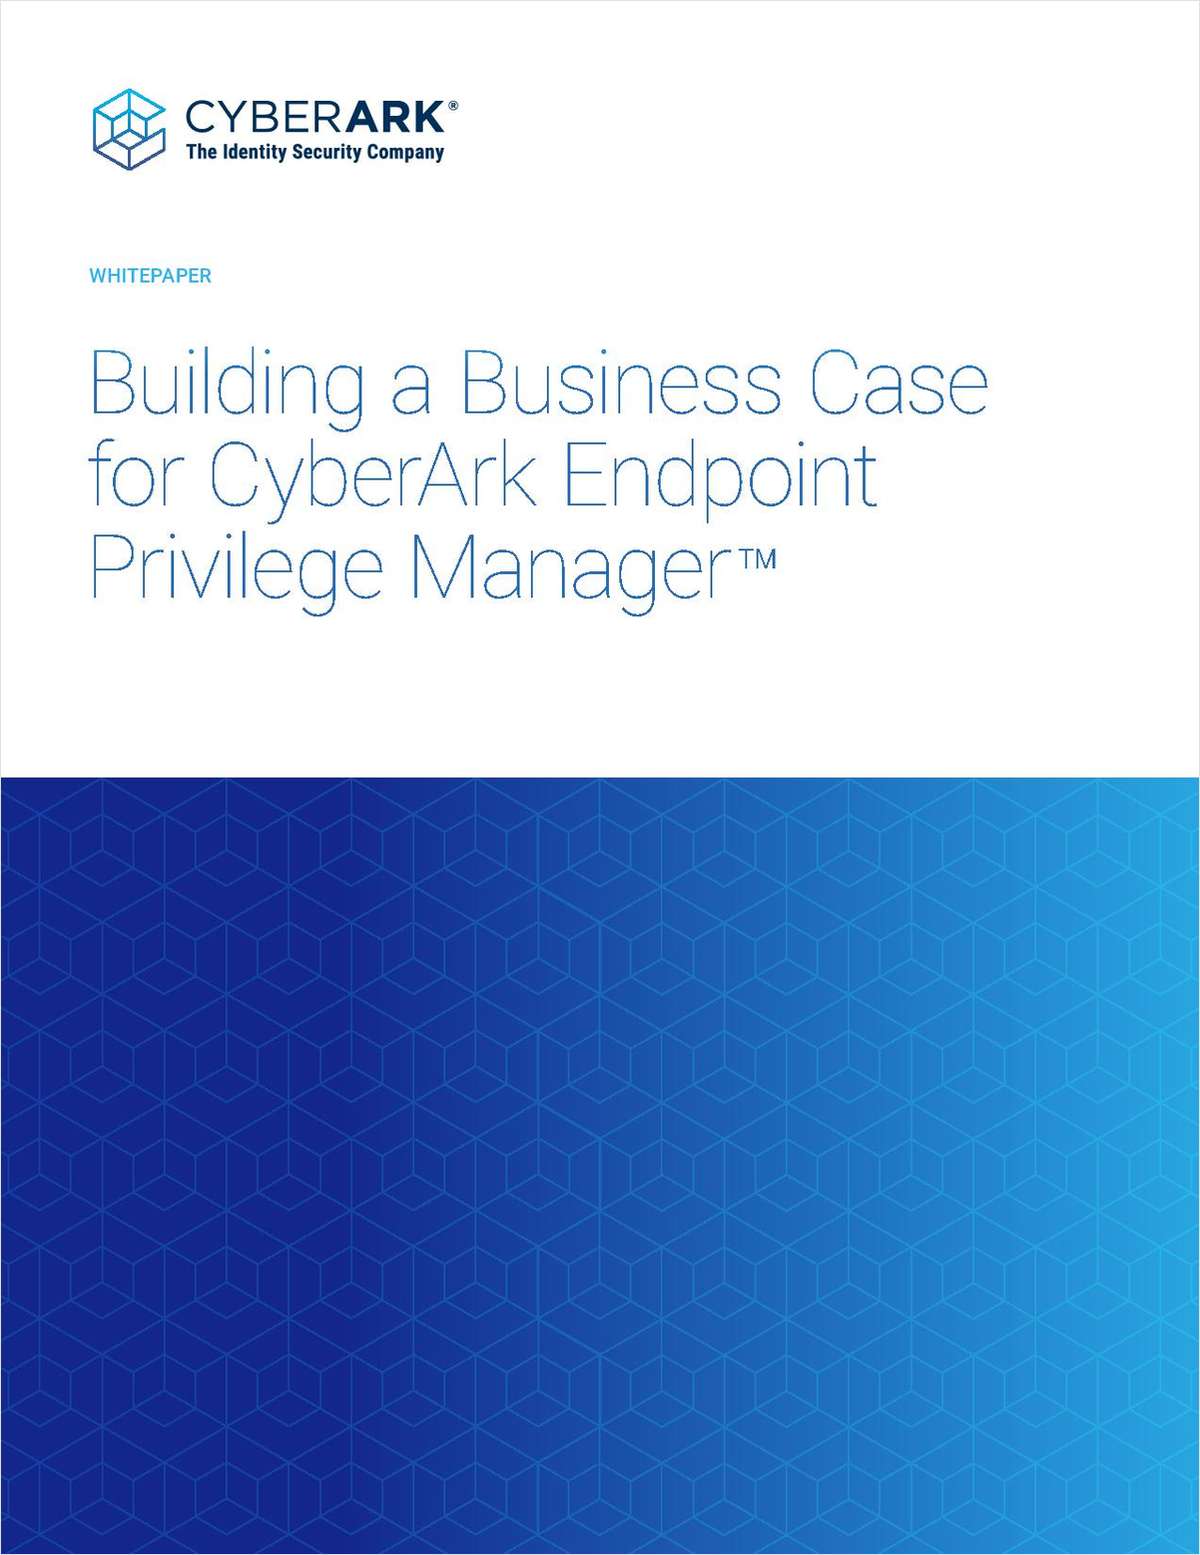 How to Build a Business Case for CyberArk Endpoint Privilege Manager